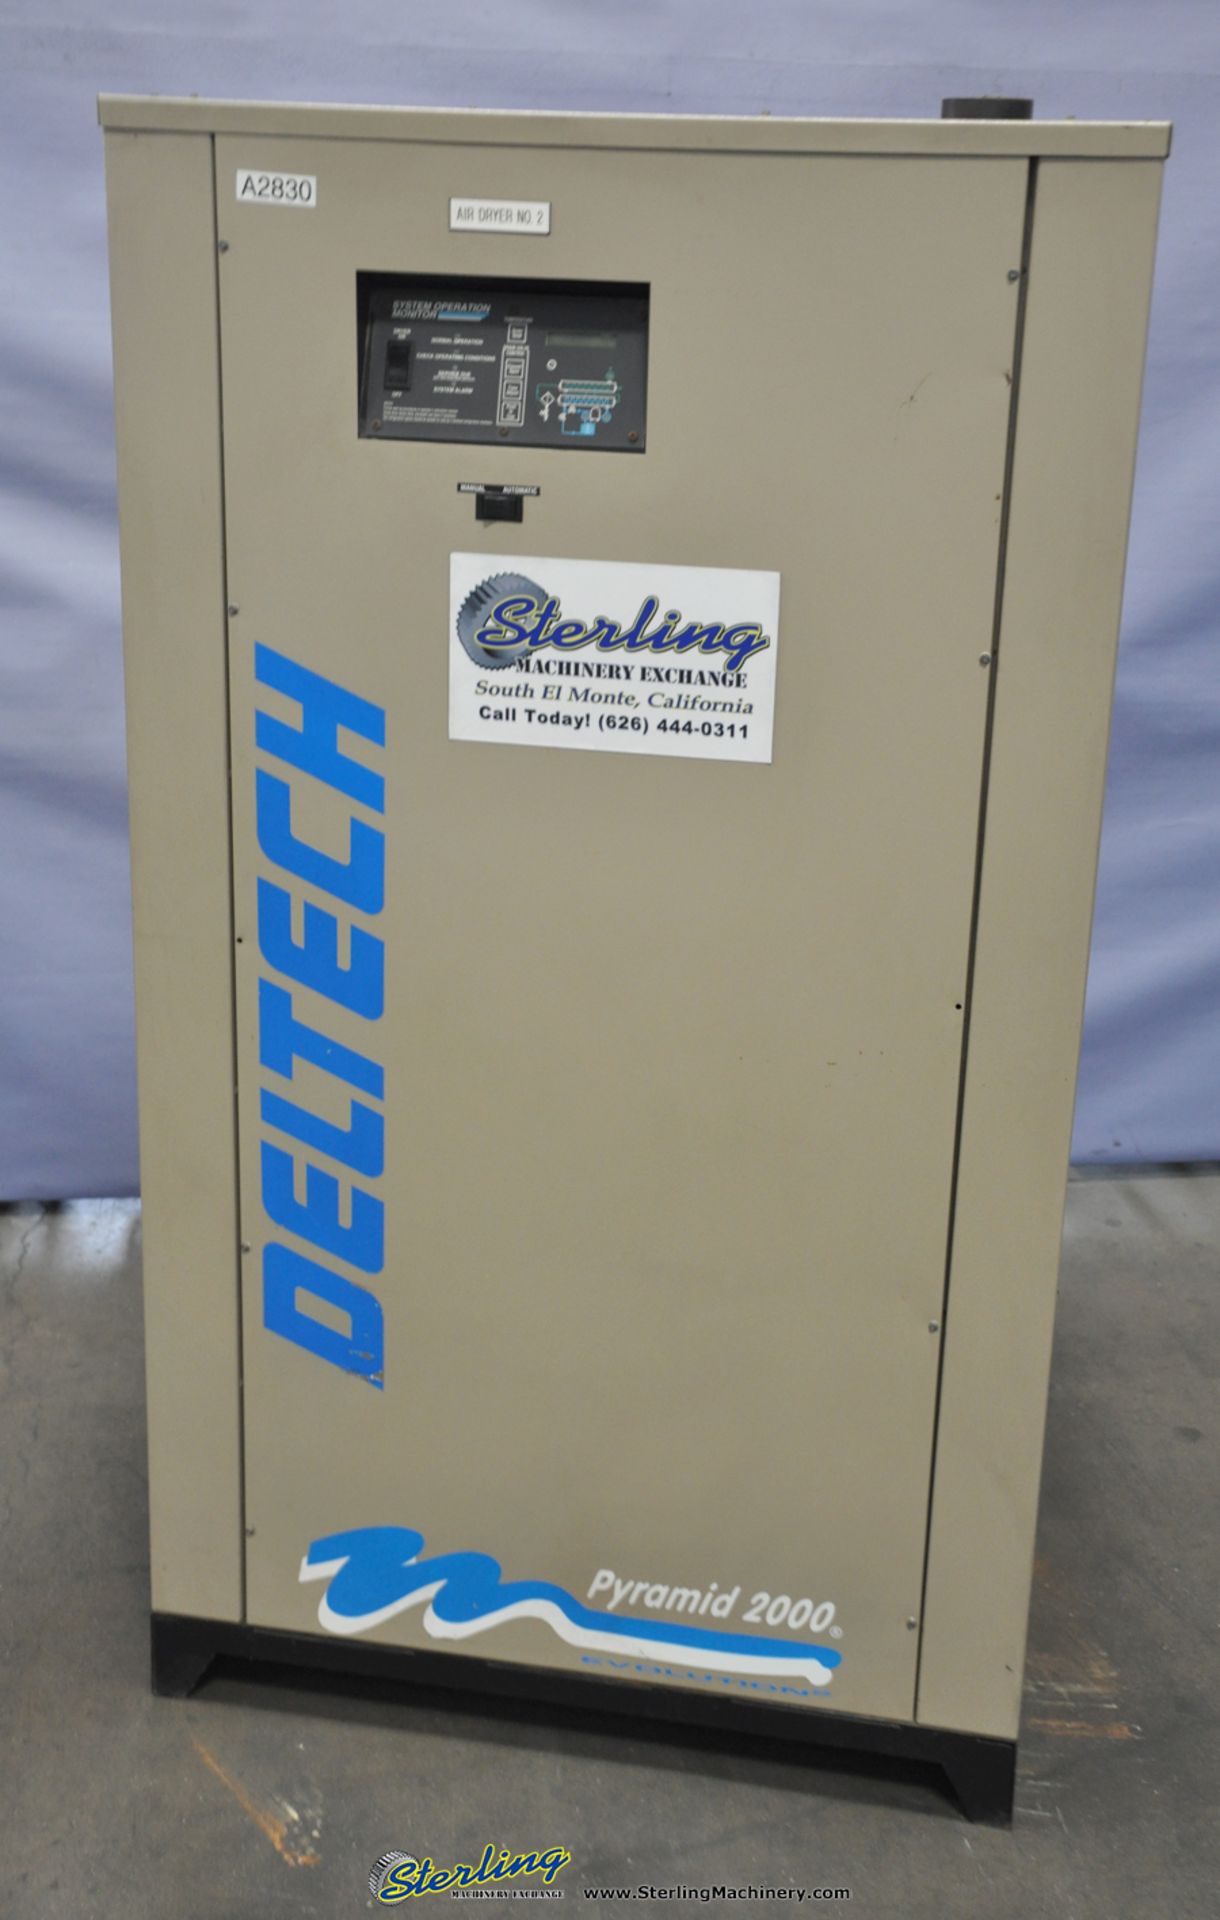 2,700 CFM Used Deltech Pyramid 2000 Refrigerated Air Dryer, Mdl. 10- 40, #A2830 (